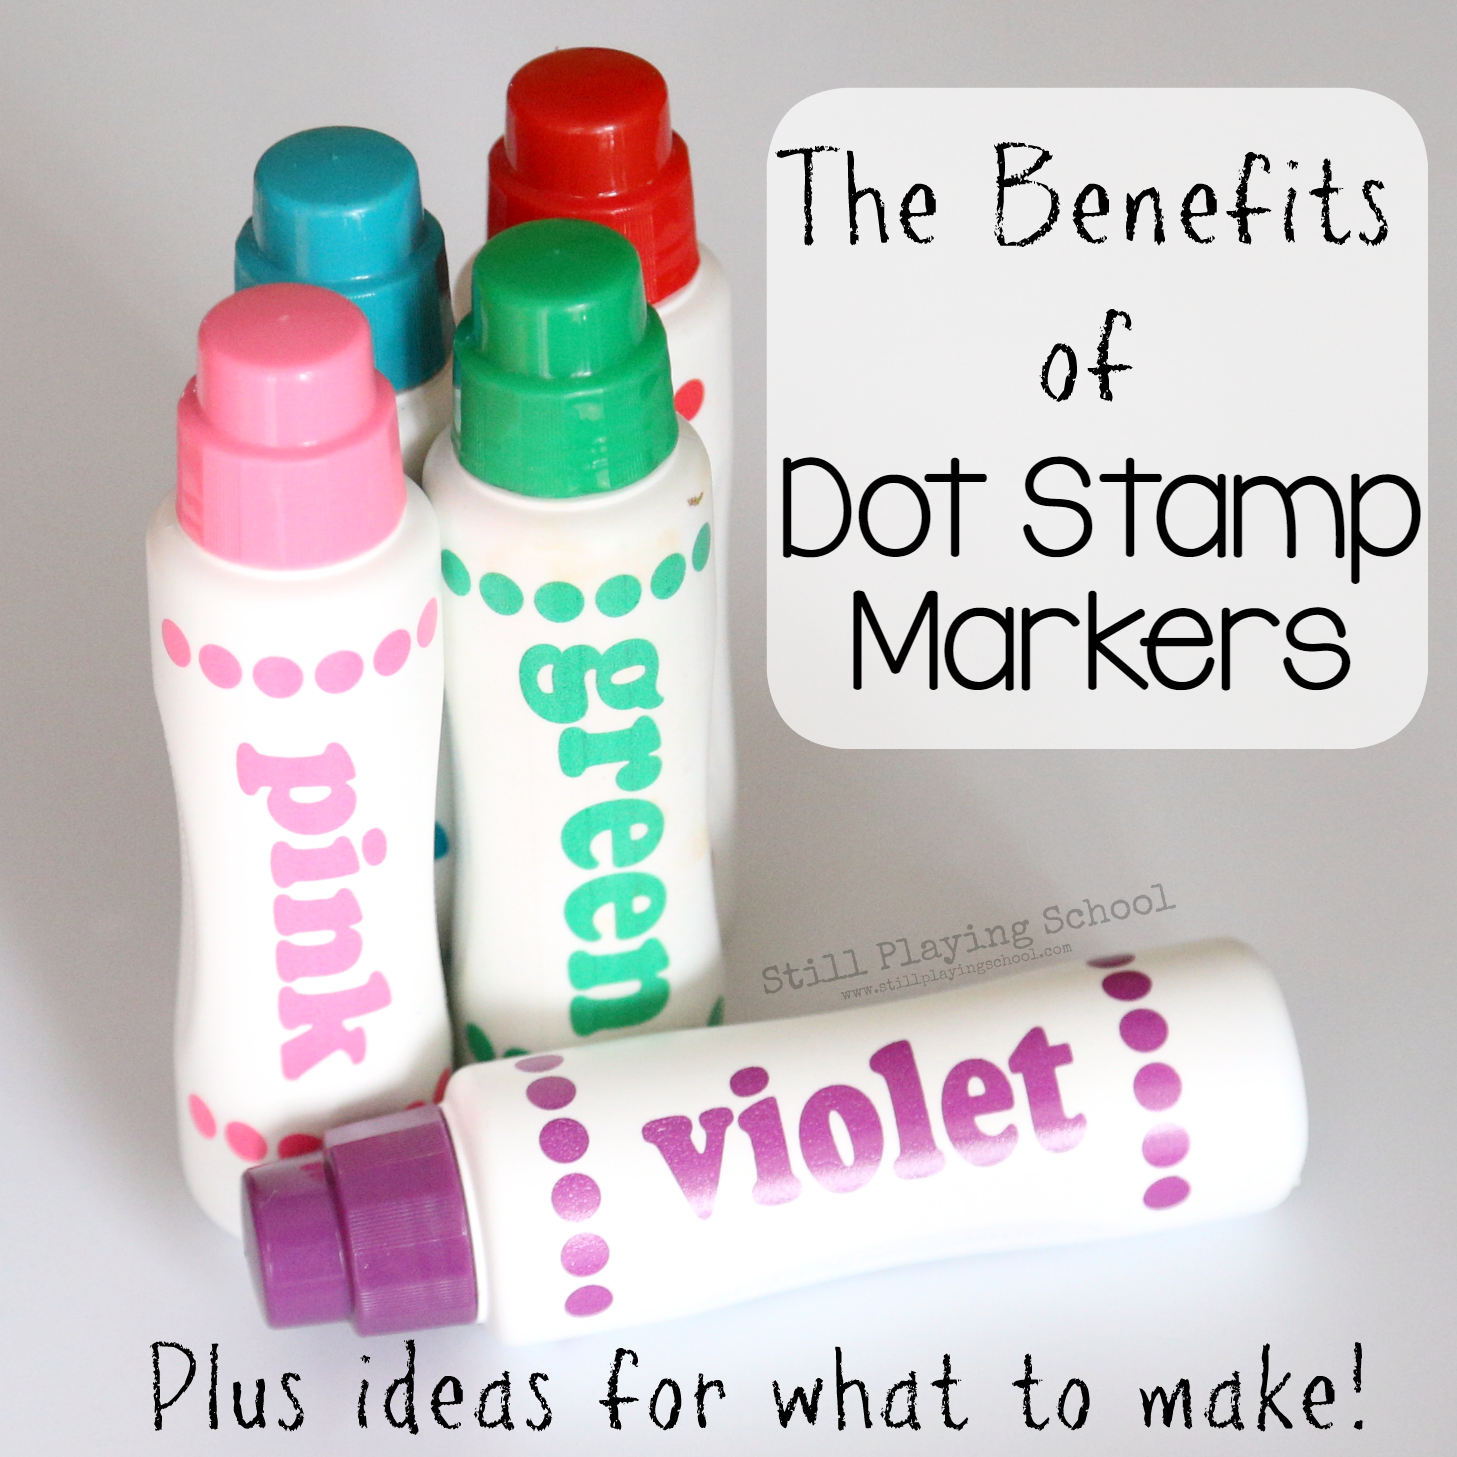 The Benefits of Dot Stamp Markers for Kids